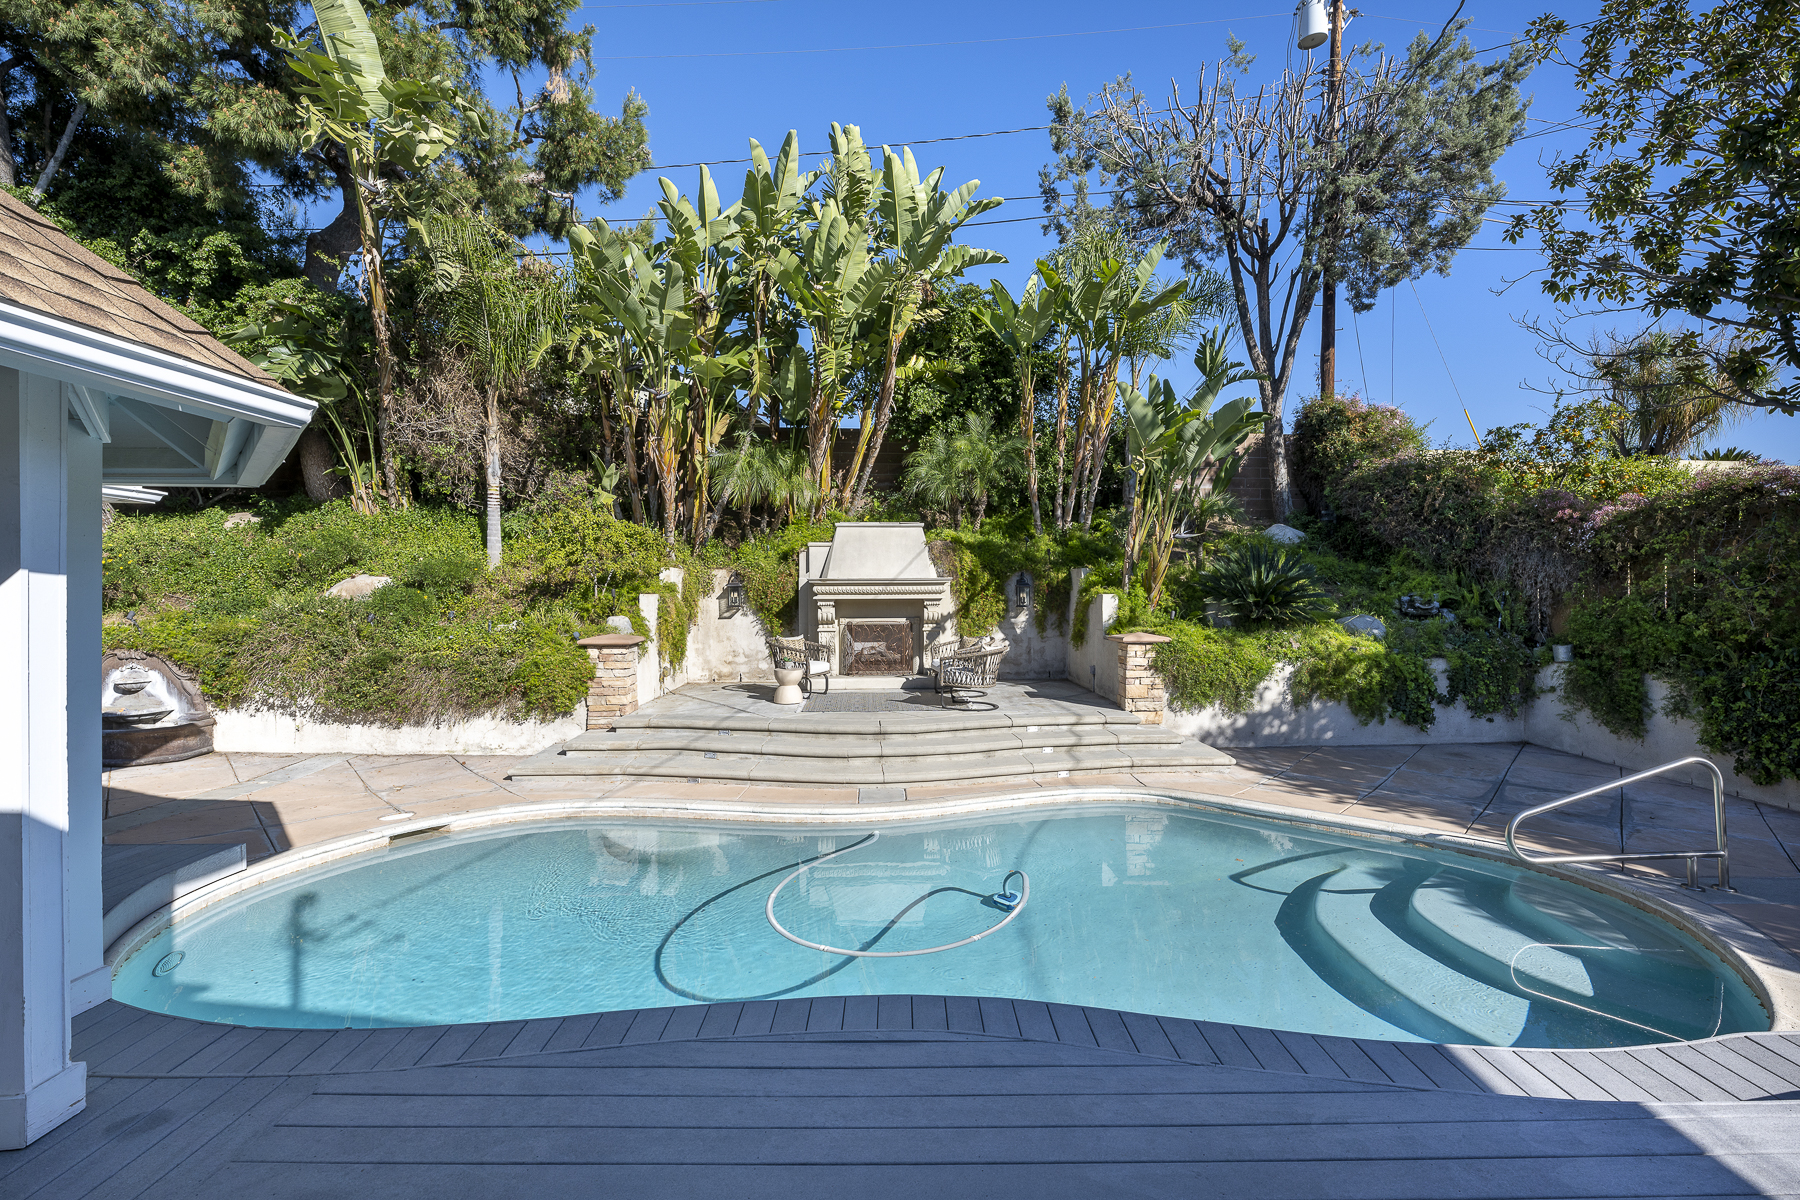 806 N. Adlena Drive, Fullerton, CA 92833: Exterior shot of pool from house.